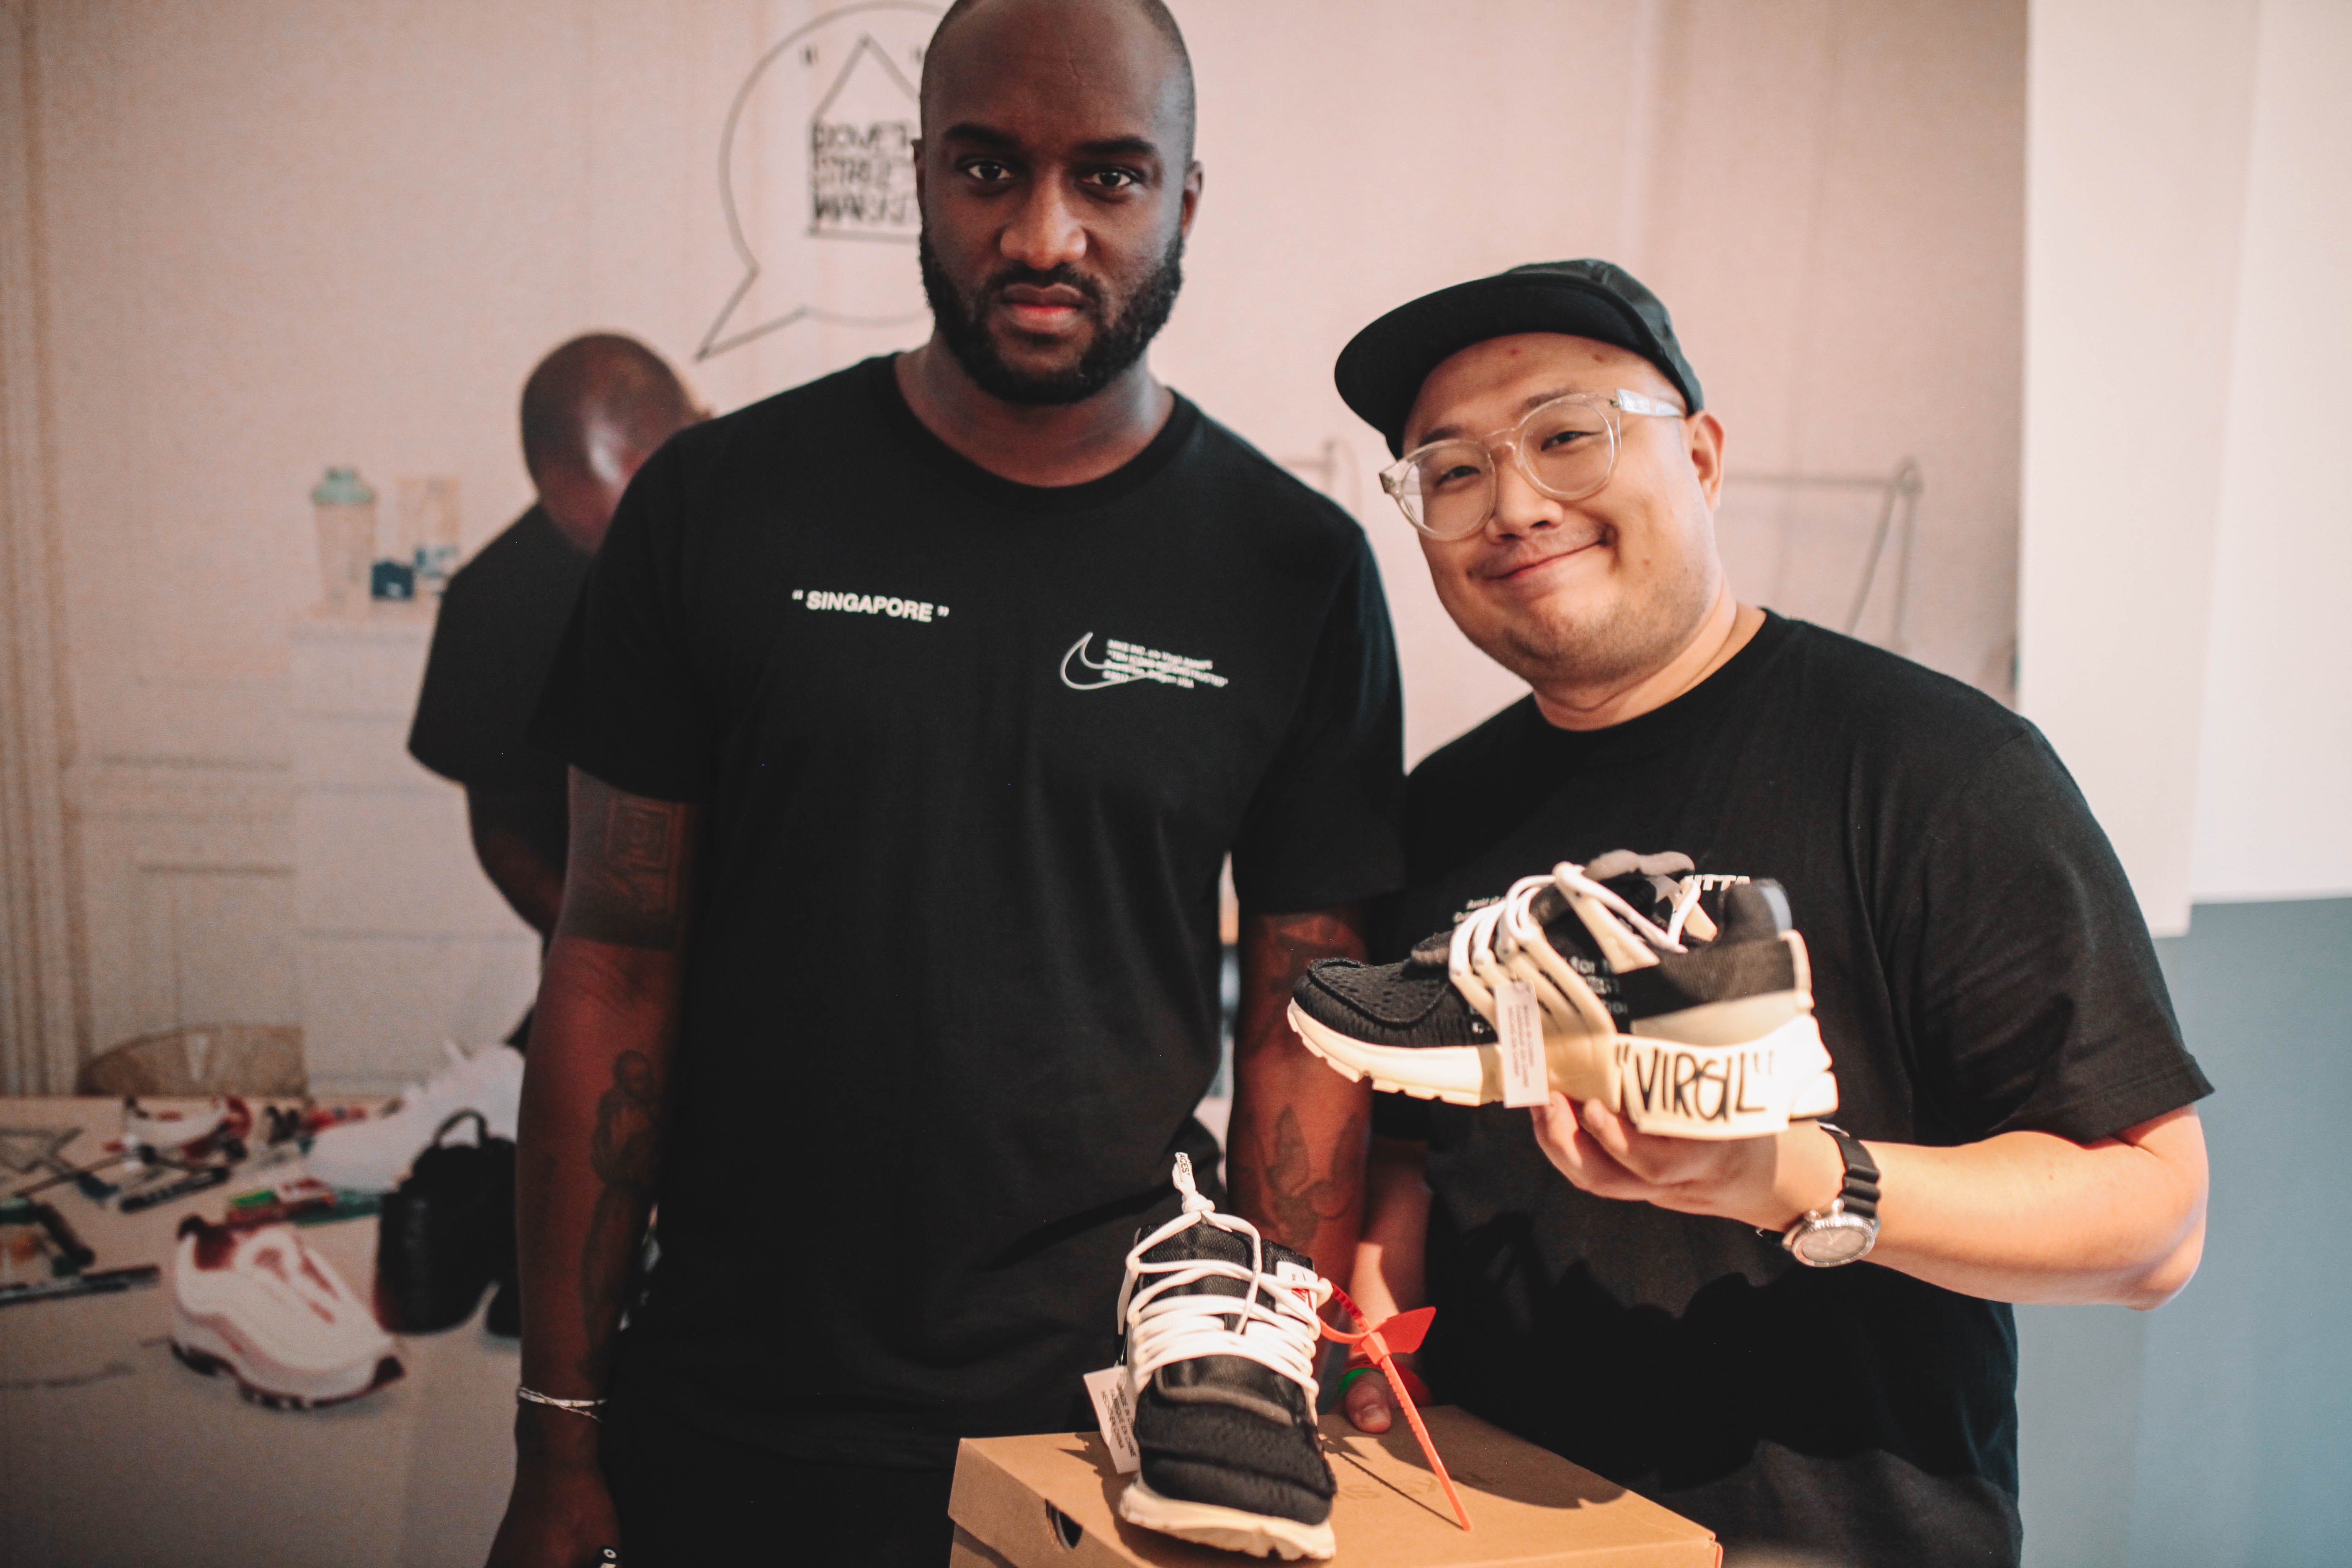 Virgil Abloh, owner of streetwear brand Off-White, in Singapore